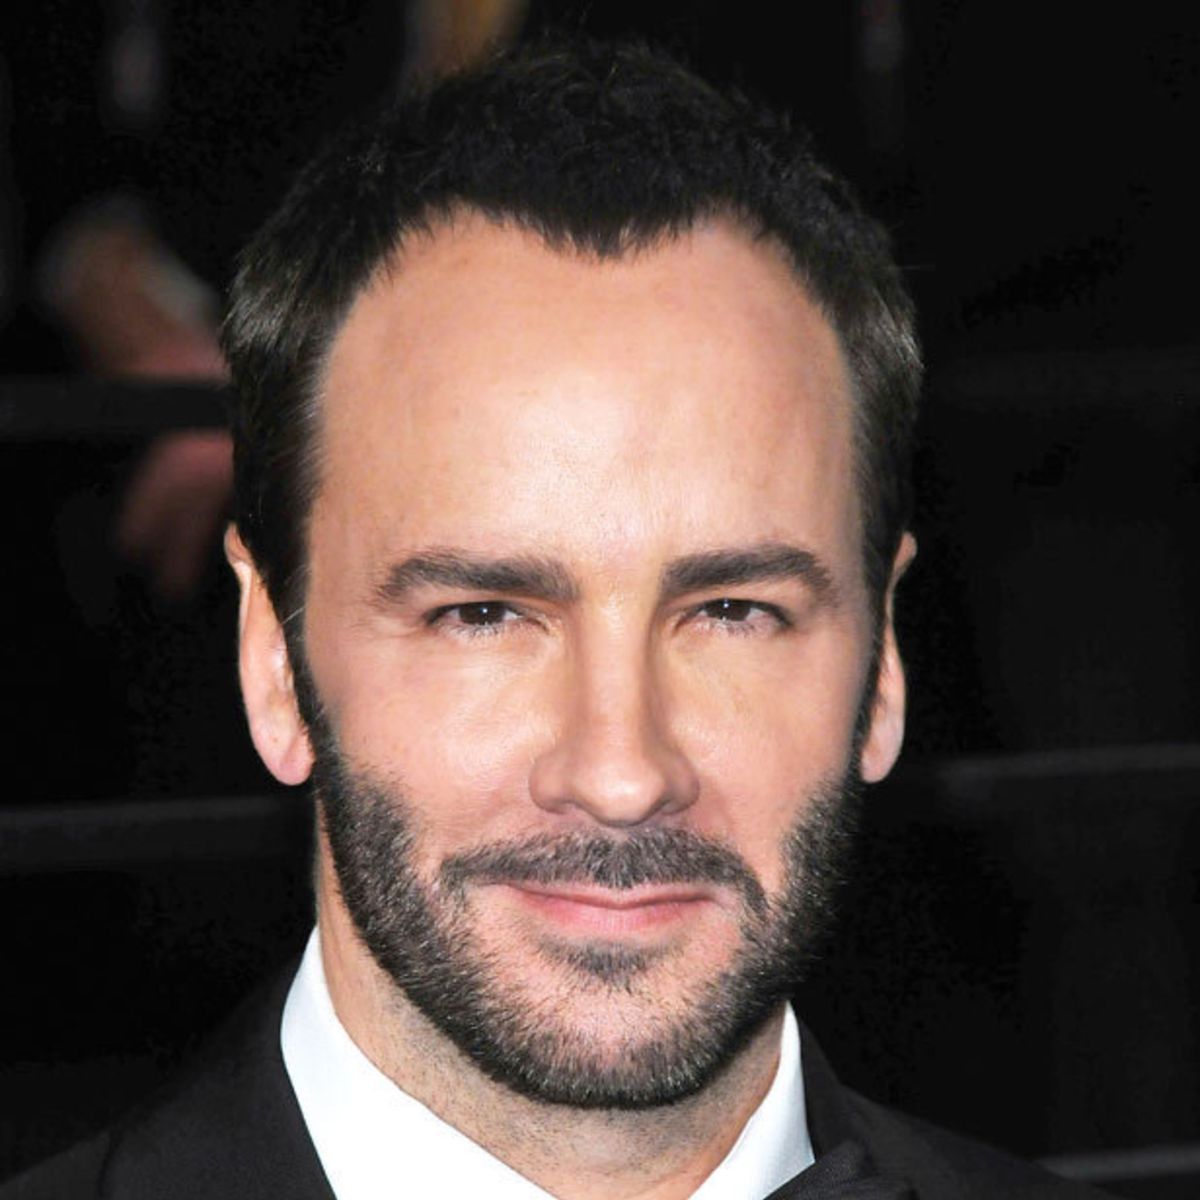 The style lessons to learn from Tom Ford – Gentlemans Journal Shop